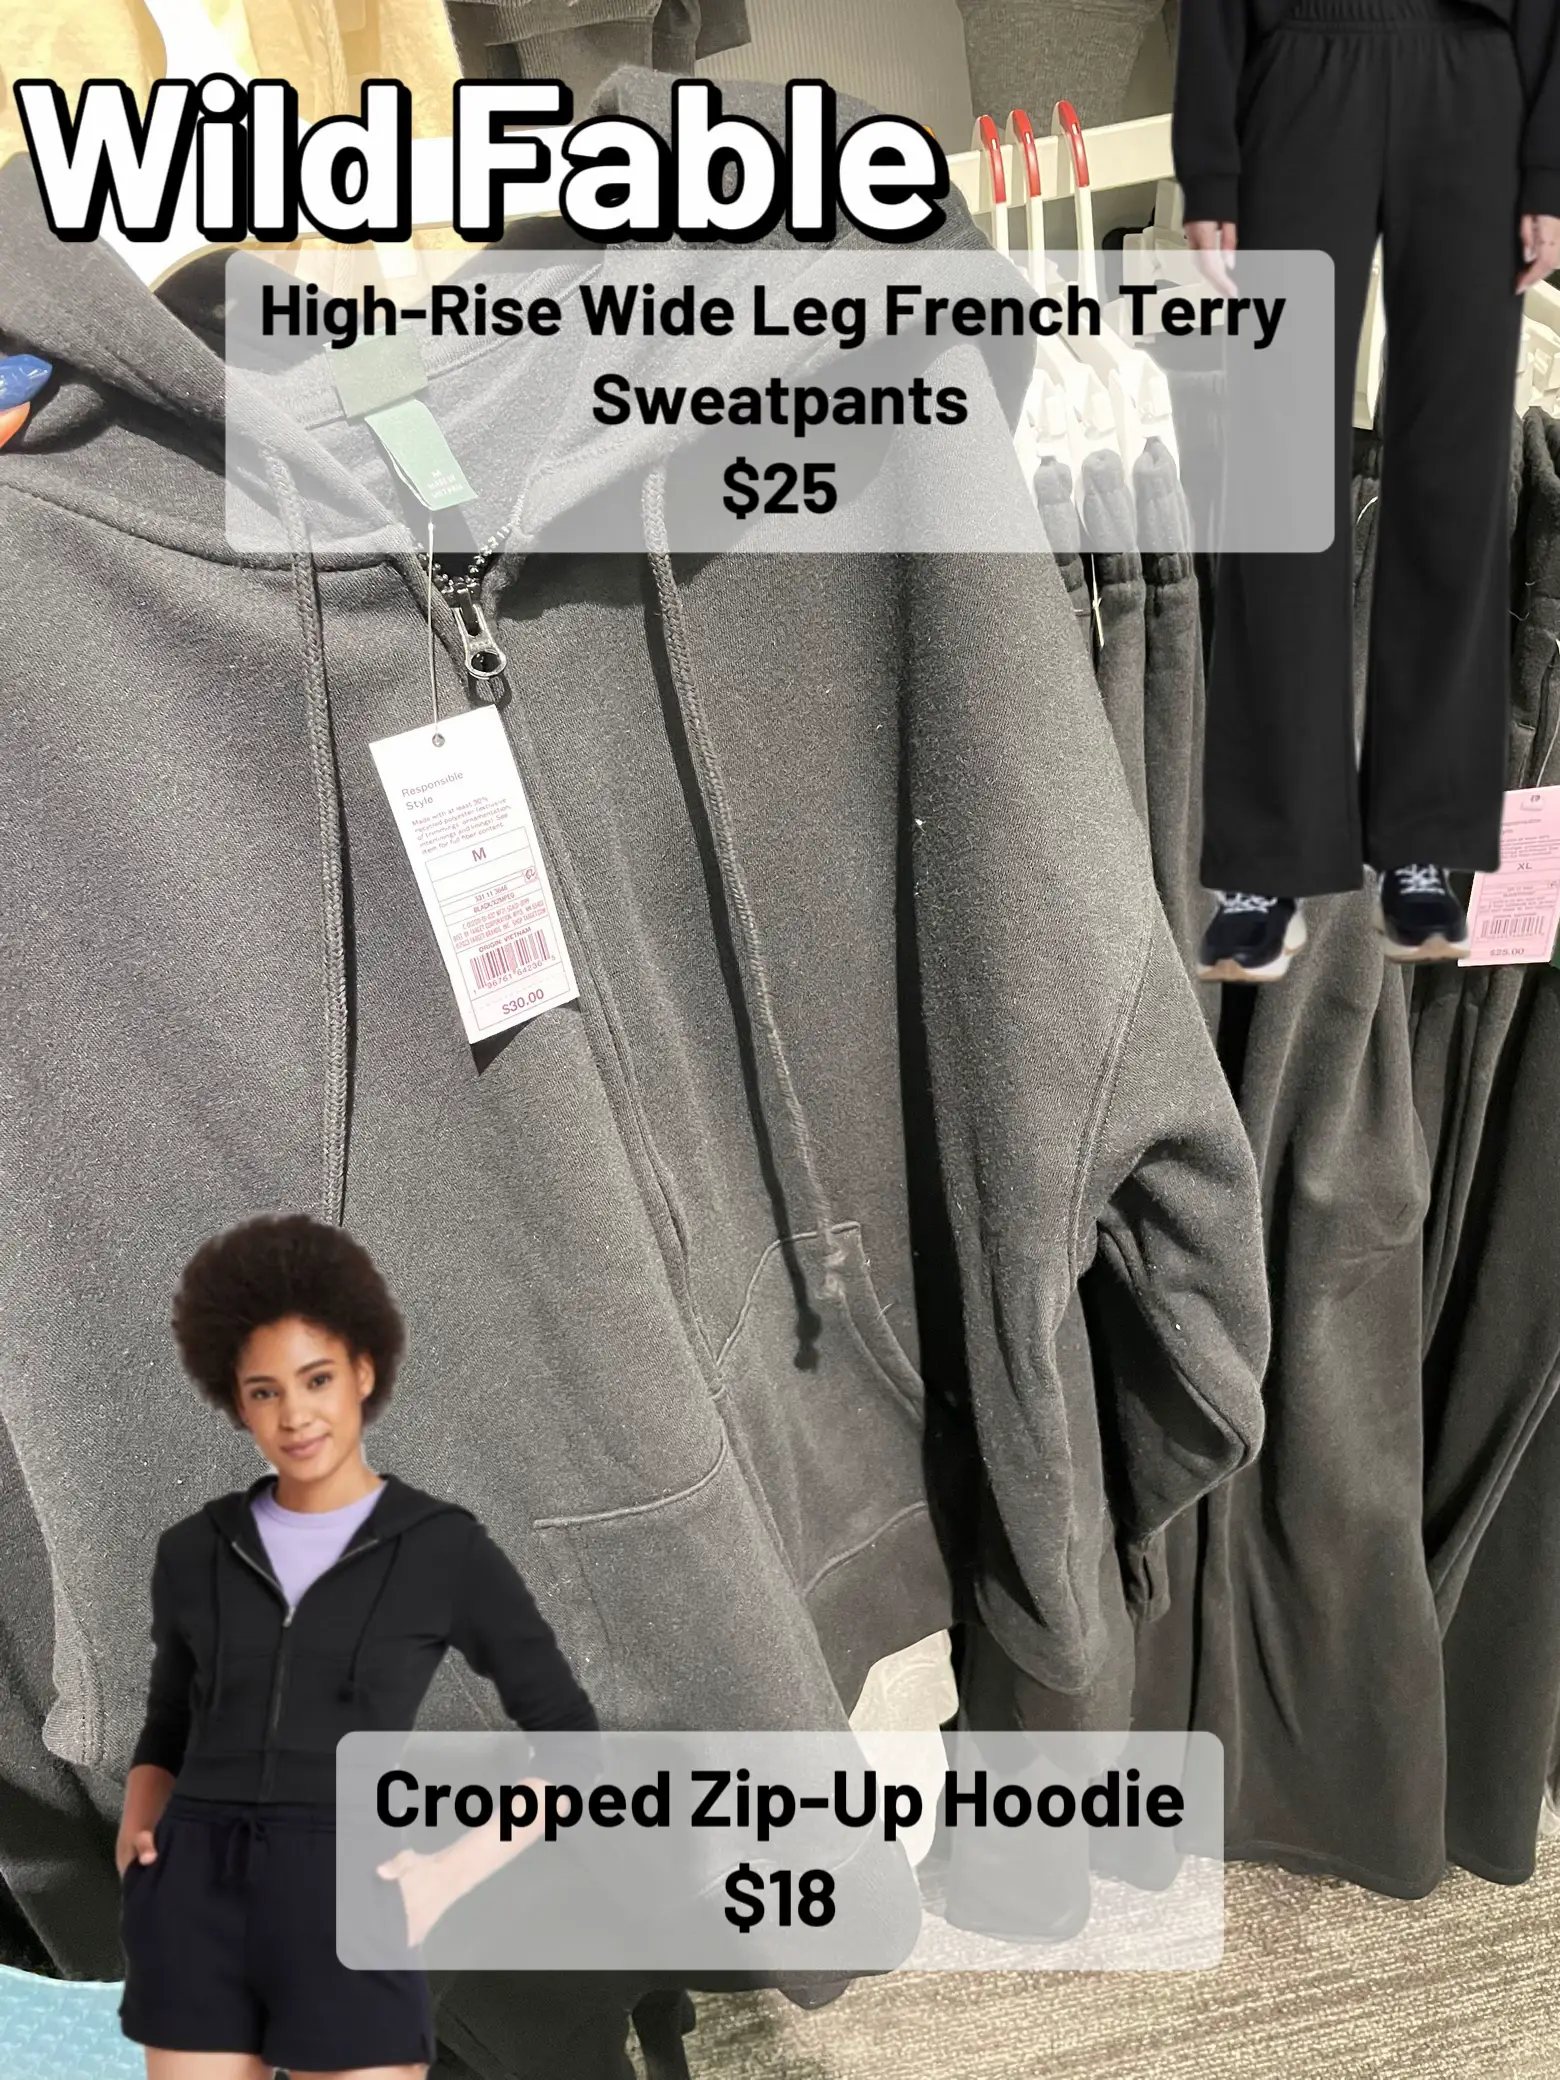 Wild Fable high rise wide leg french terry sweatpants. $25. For refere